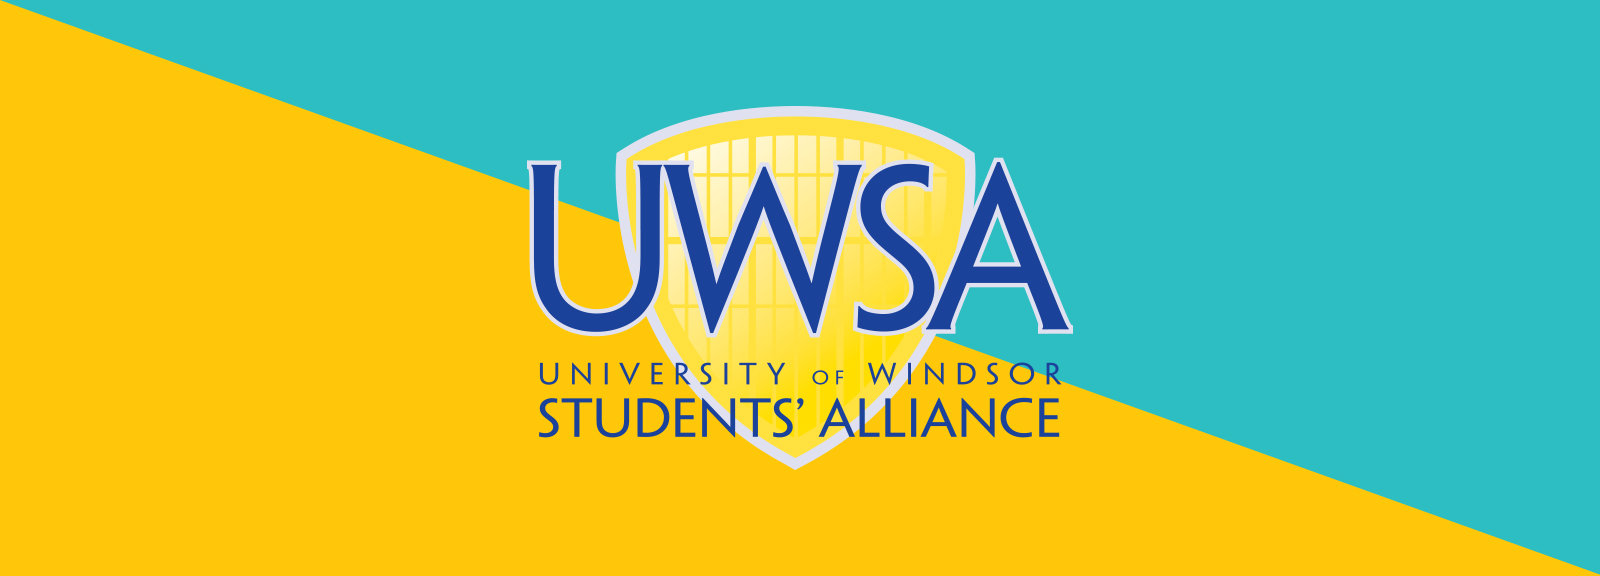 SECOND NOTICE OF 2021 UWSA ANNUAL GENERAL MEETING – AGENDA & PROXY FORM NOW AVAILABLE